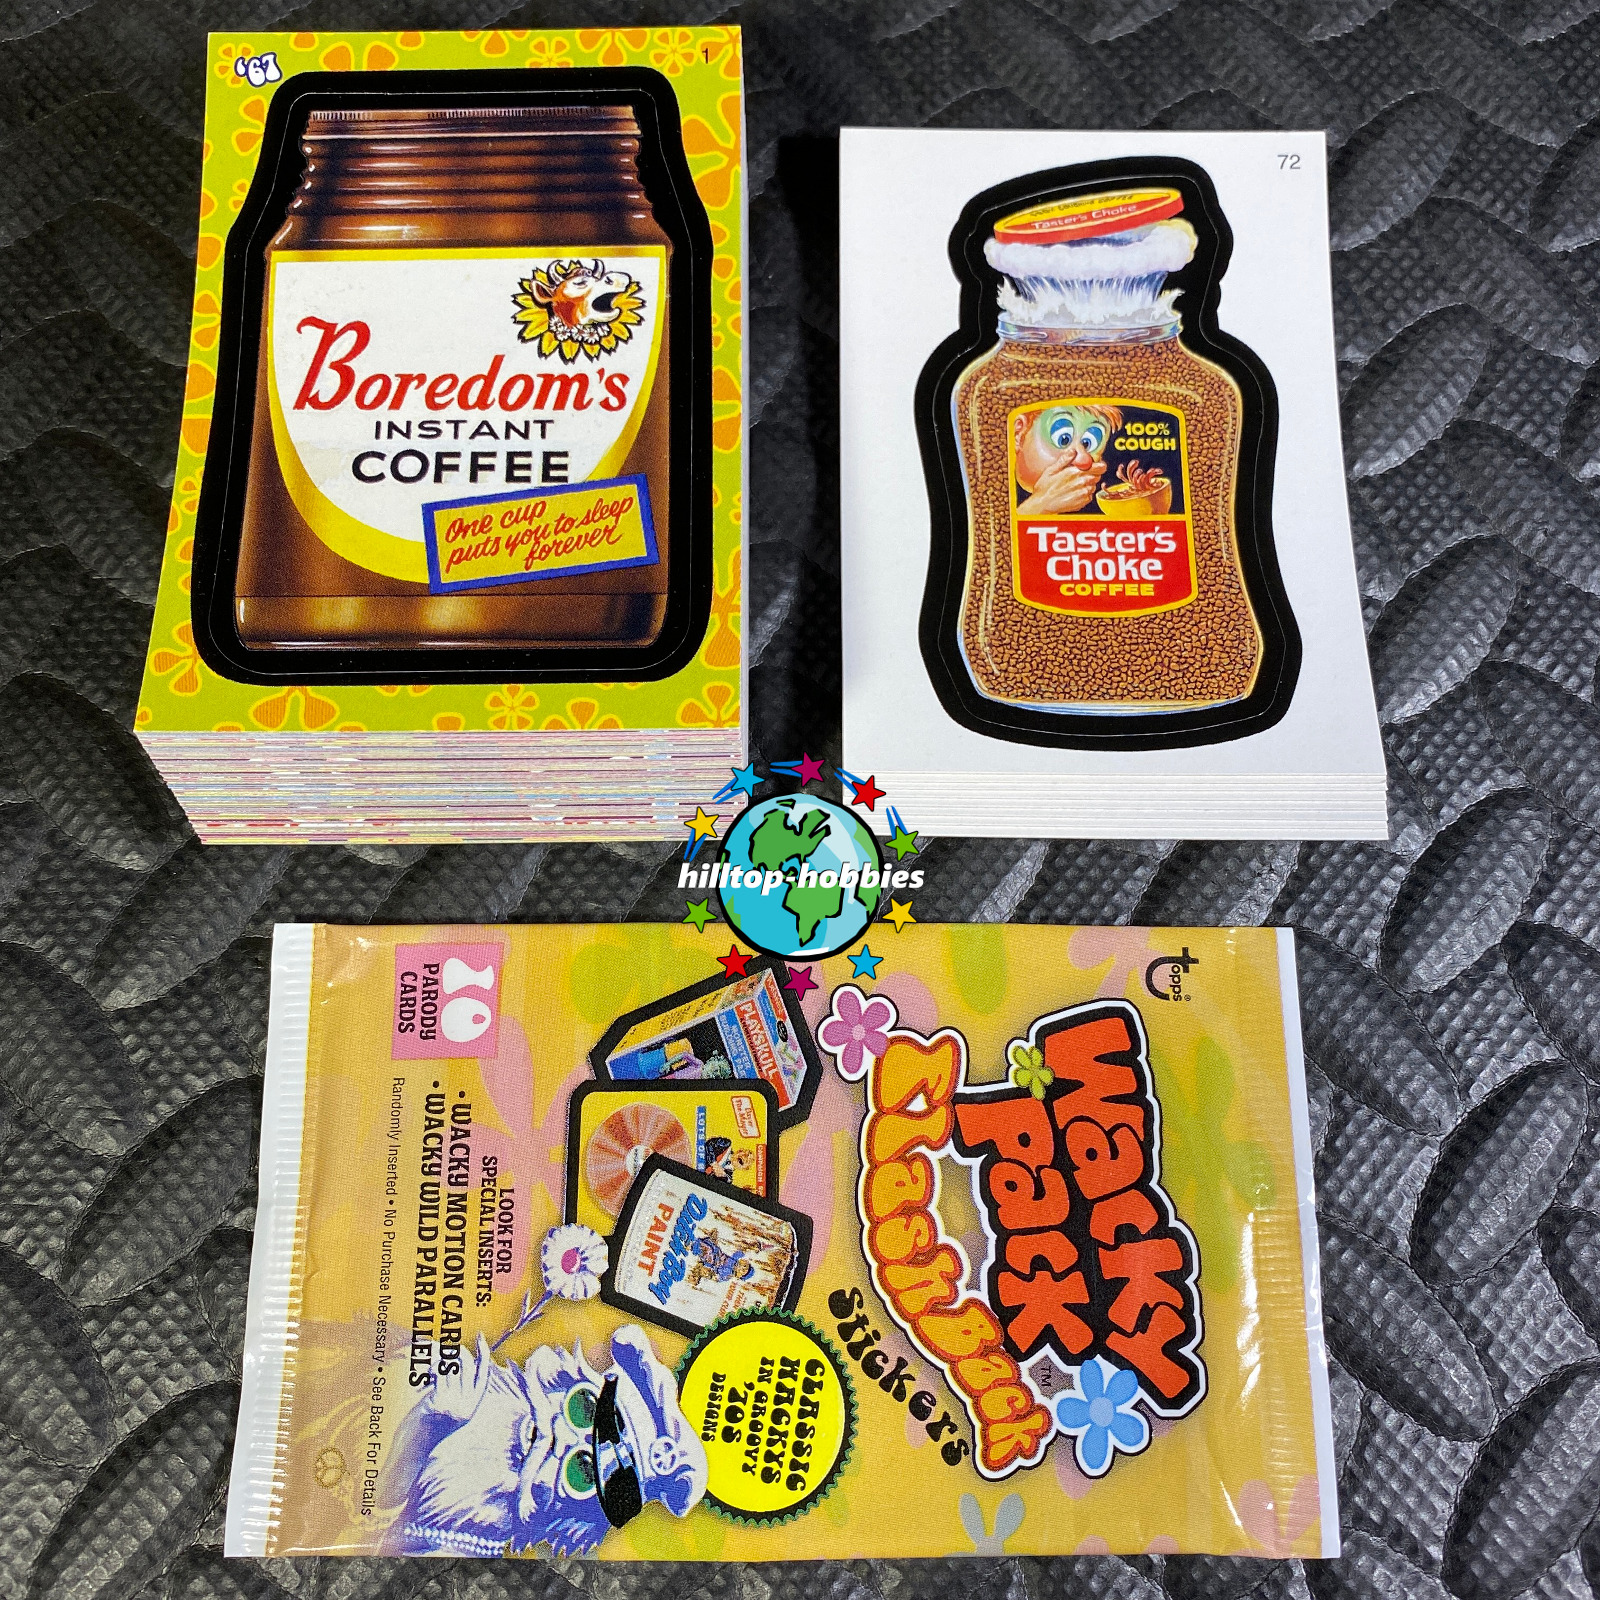 TOPPS 2008 WACKY PACKAGES FLASHBACK SERIES 1 COMPLETE 72-CARD BASE SET +WRAPPER